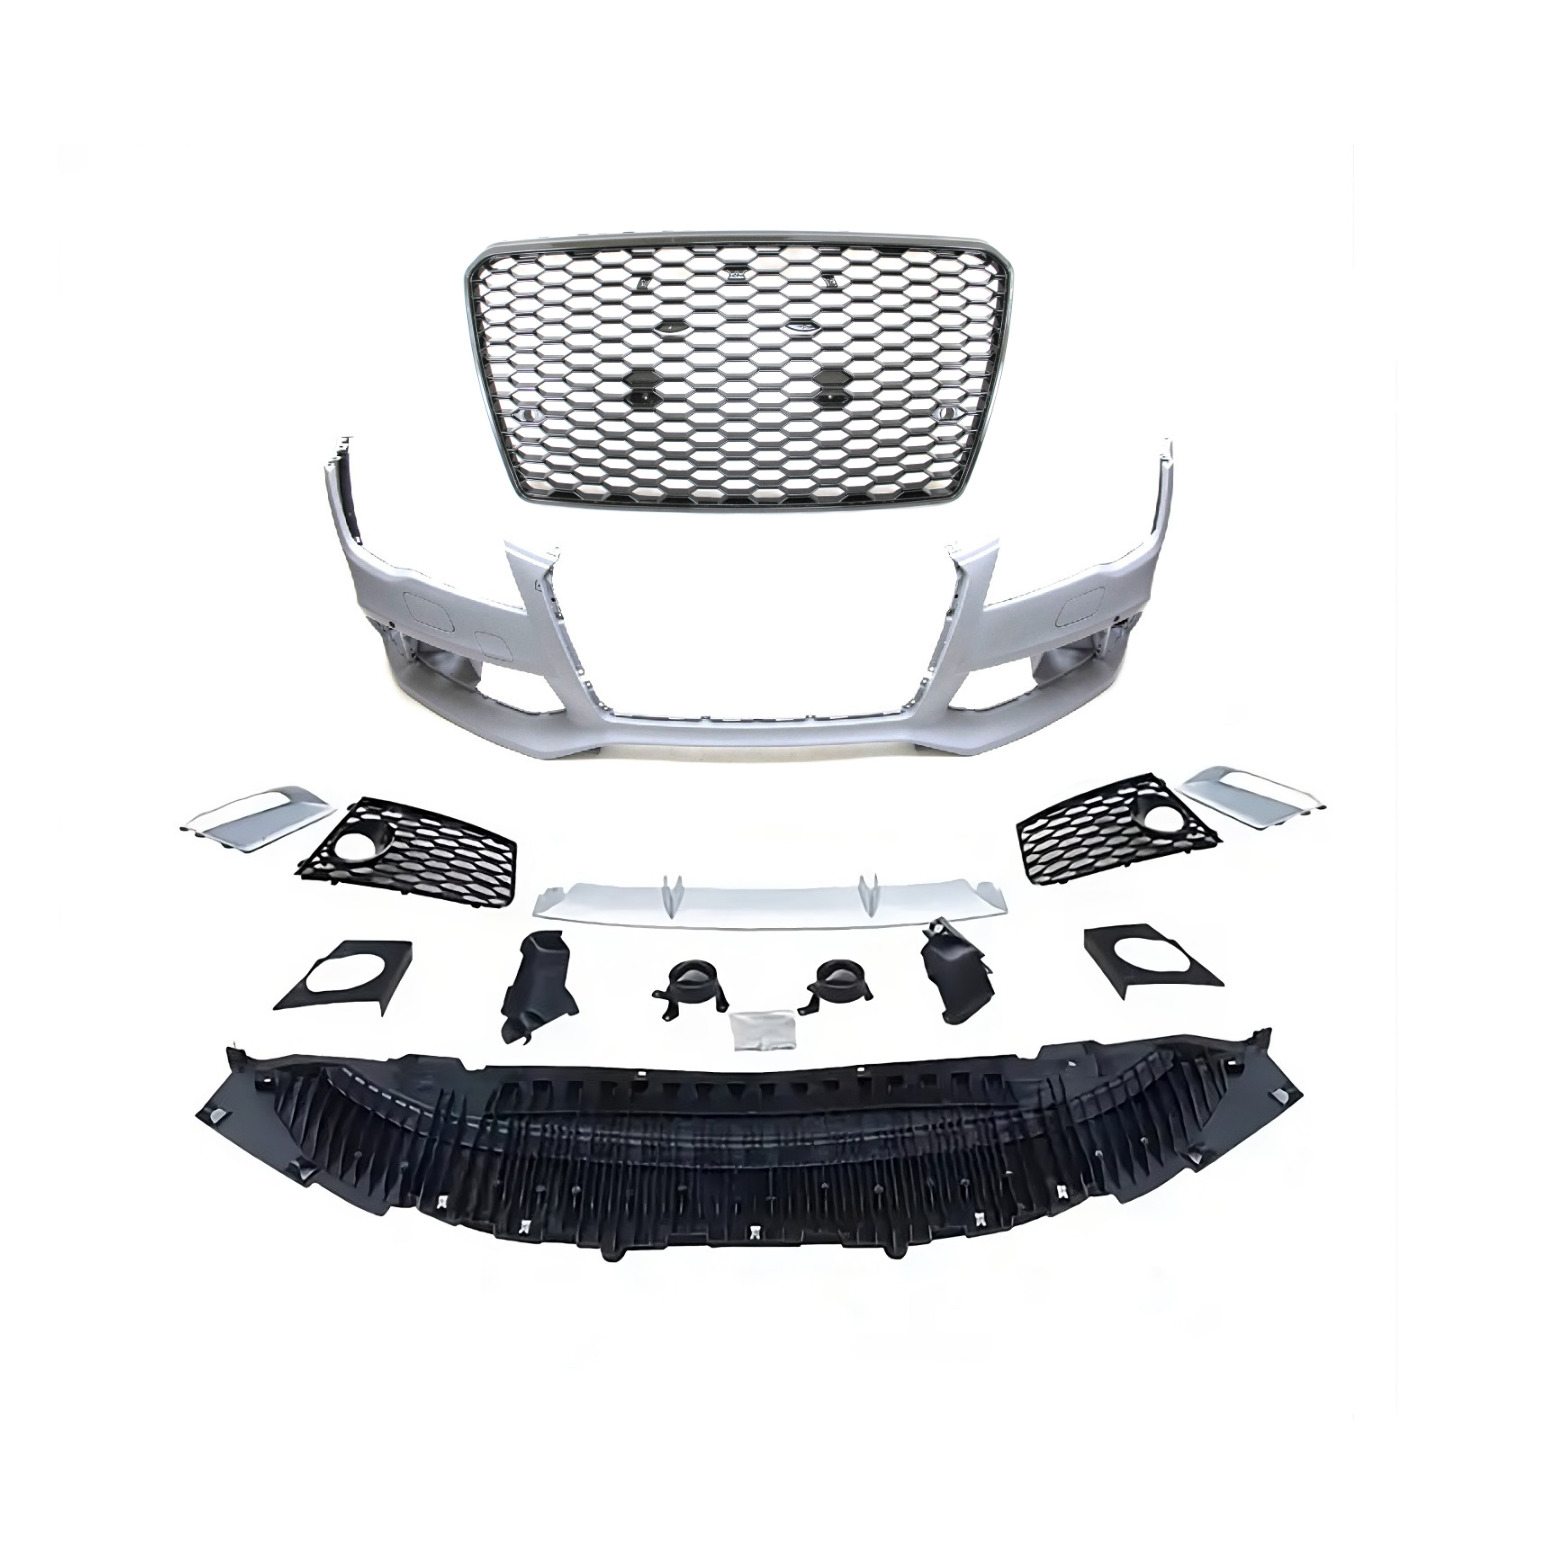 2012- 2015 A7 S7 front bumper cover grille conversion kit set to RS7